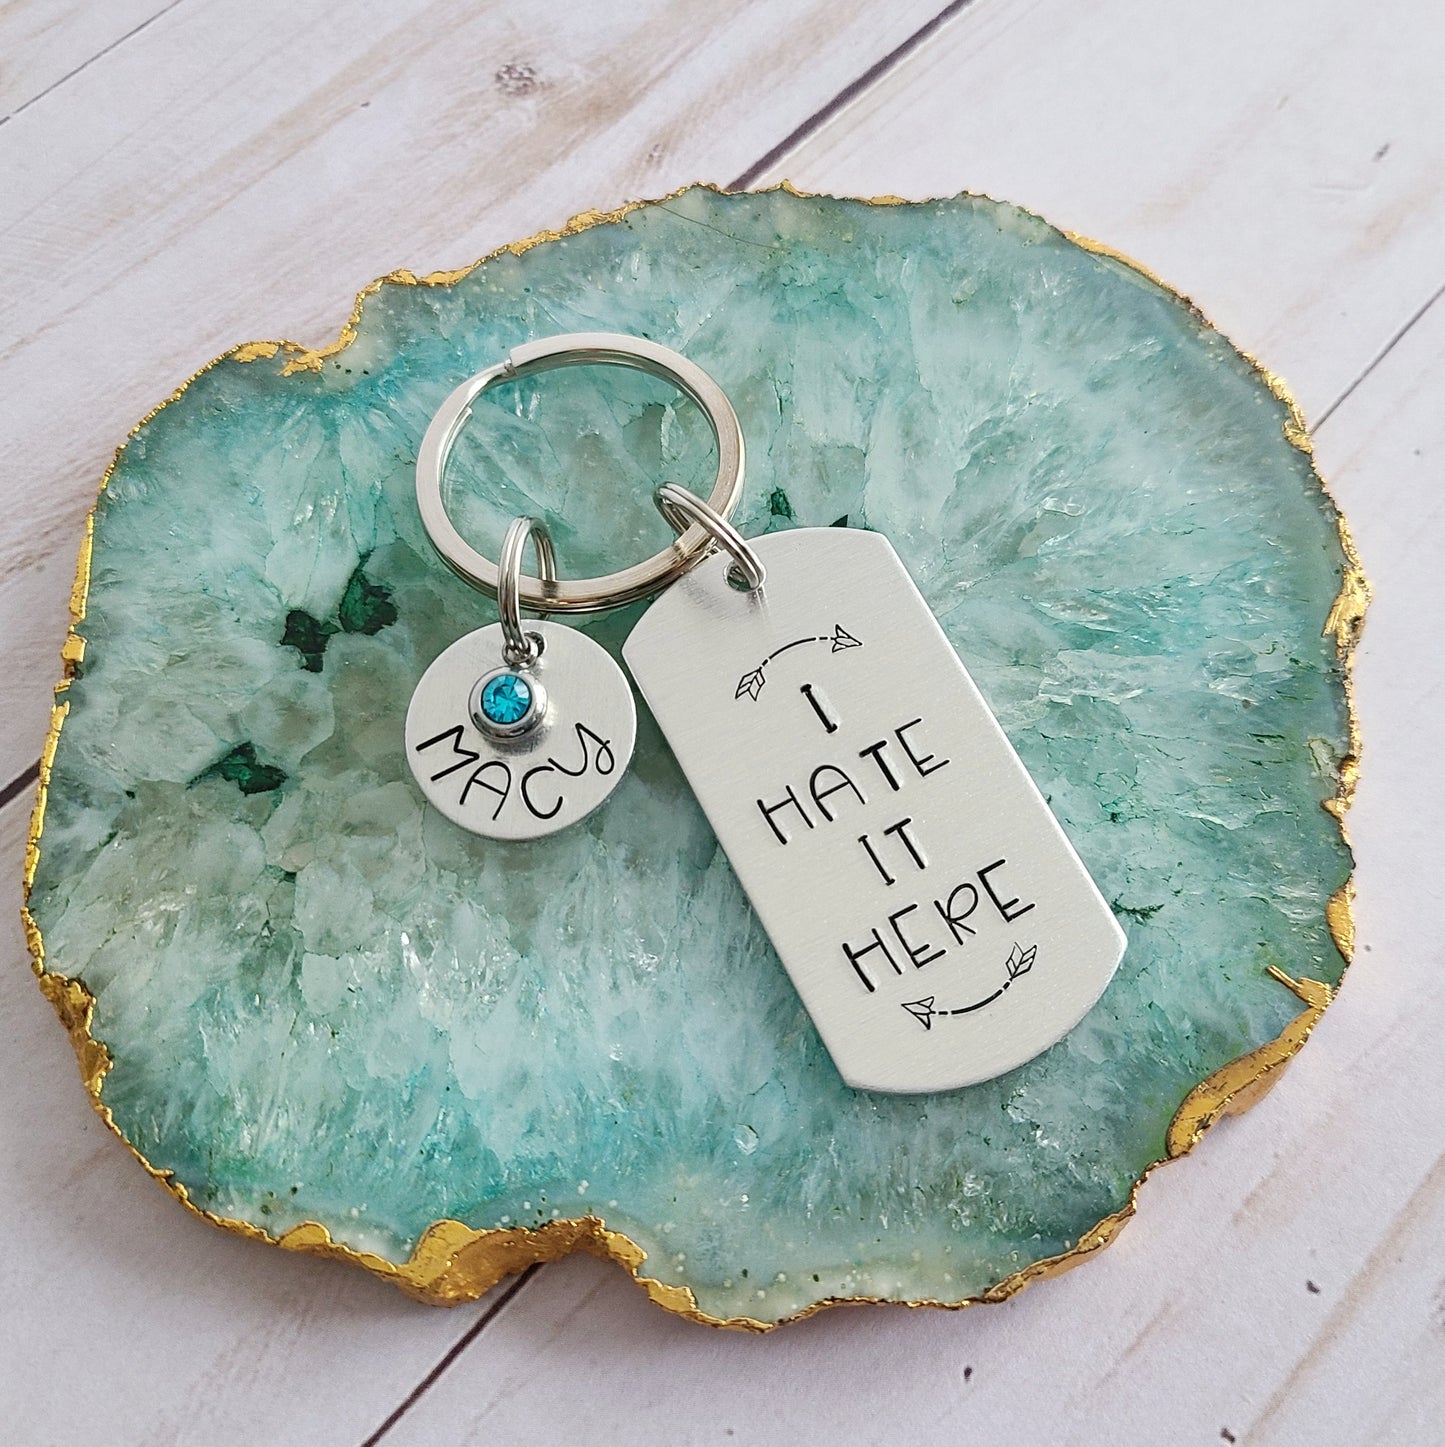 I Hate It Here Keychain, Funny Keychain for Work Bestie, Coworker Leaving Gift